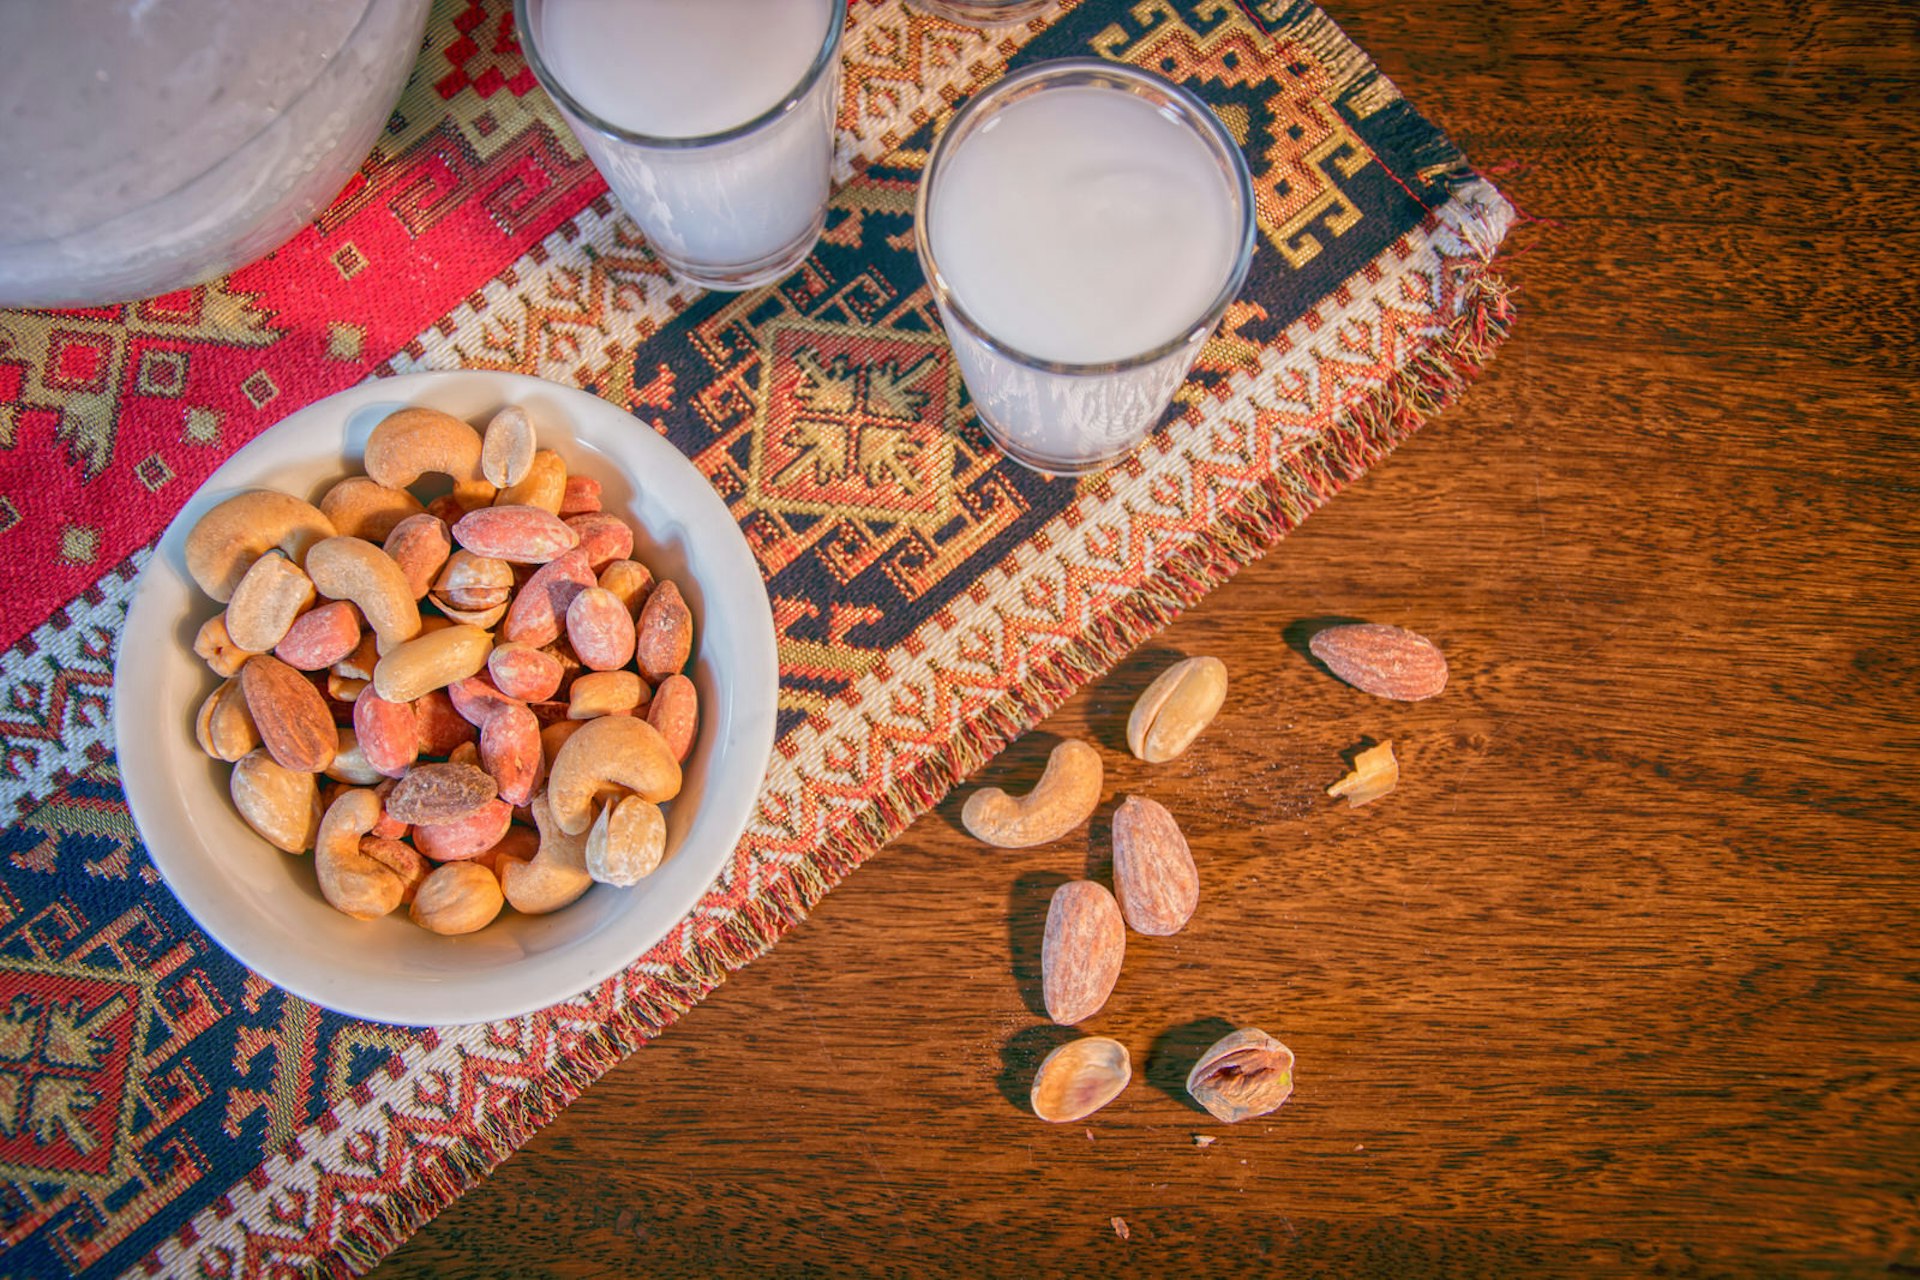 Two glasses of arak and a plate of nuts on a tabletop 